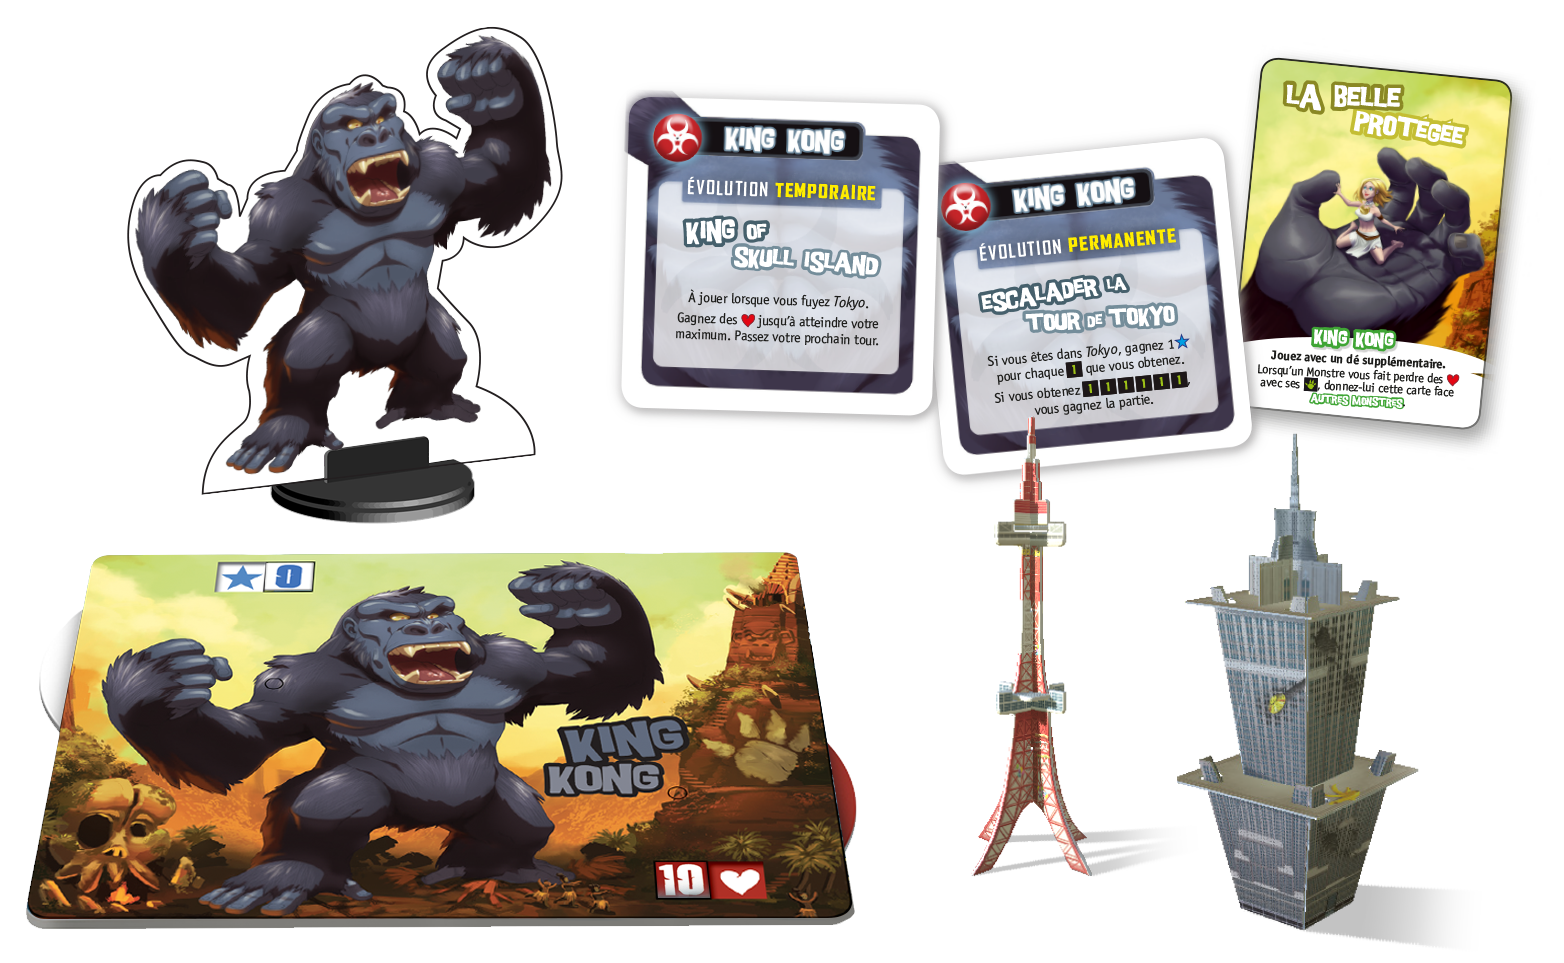 King Of Tokyo Monster Pack #2 - King Kong | North of Exile Games